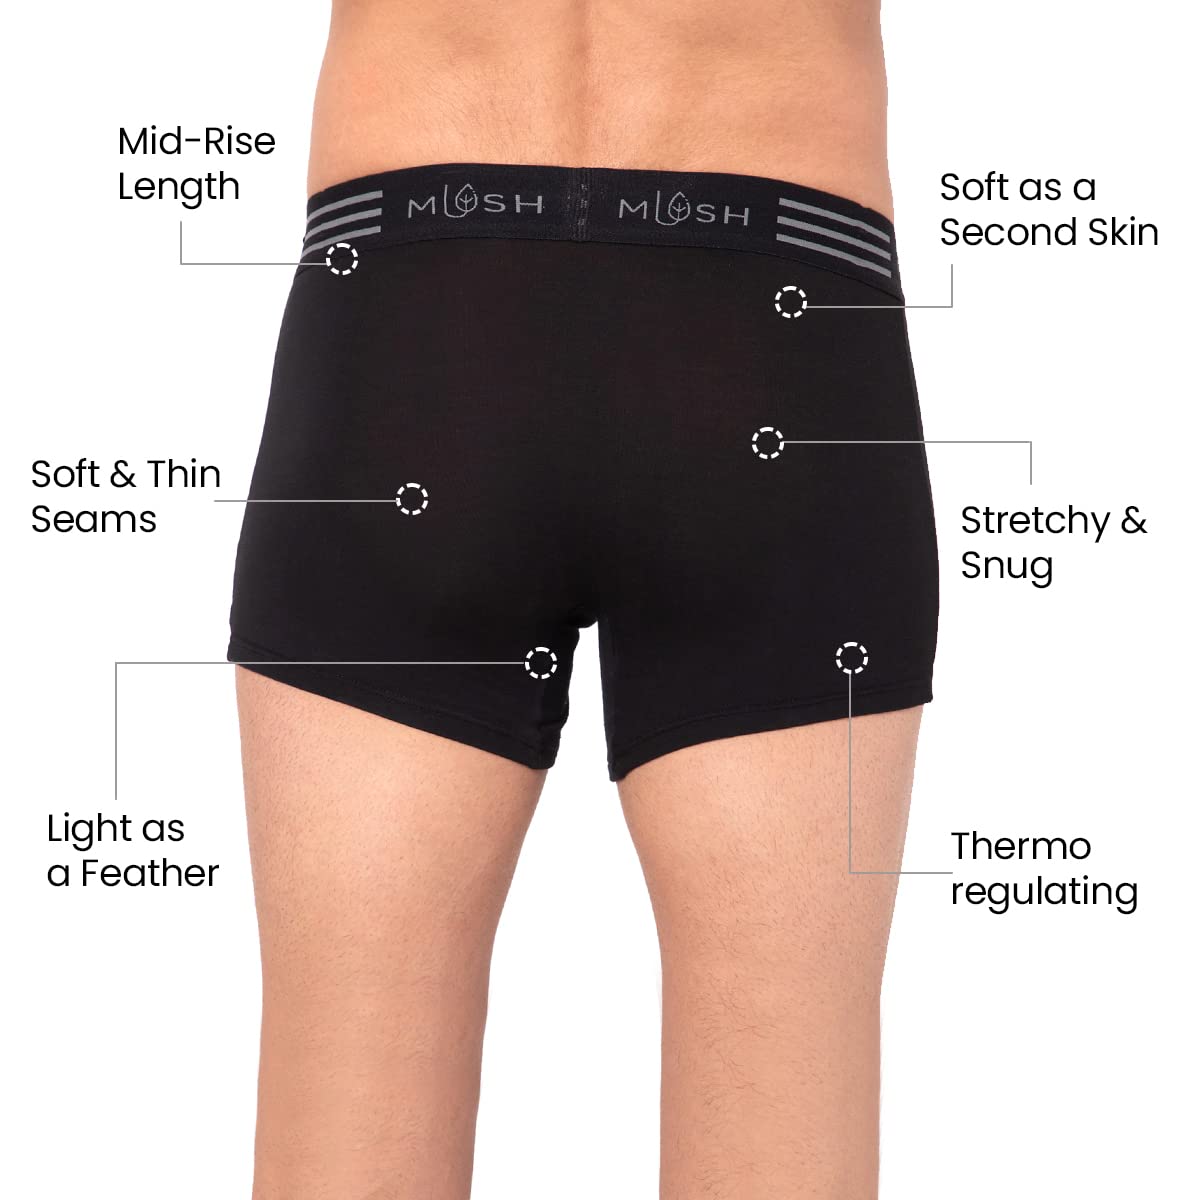 Mush Ultra Soft, Breathable, Feather Light Men's Bamboo Trunk || Naturally Anti-Odor and Anti-Microbial Bamboo Innerwear Pack of 3 (L, Grey White and Black)